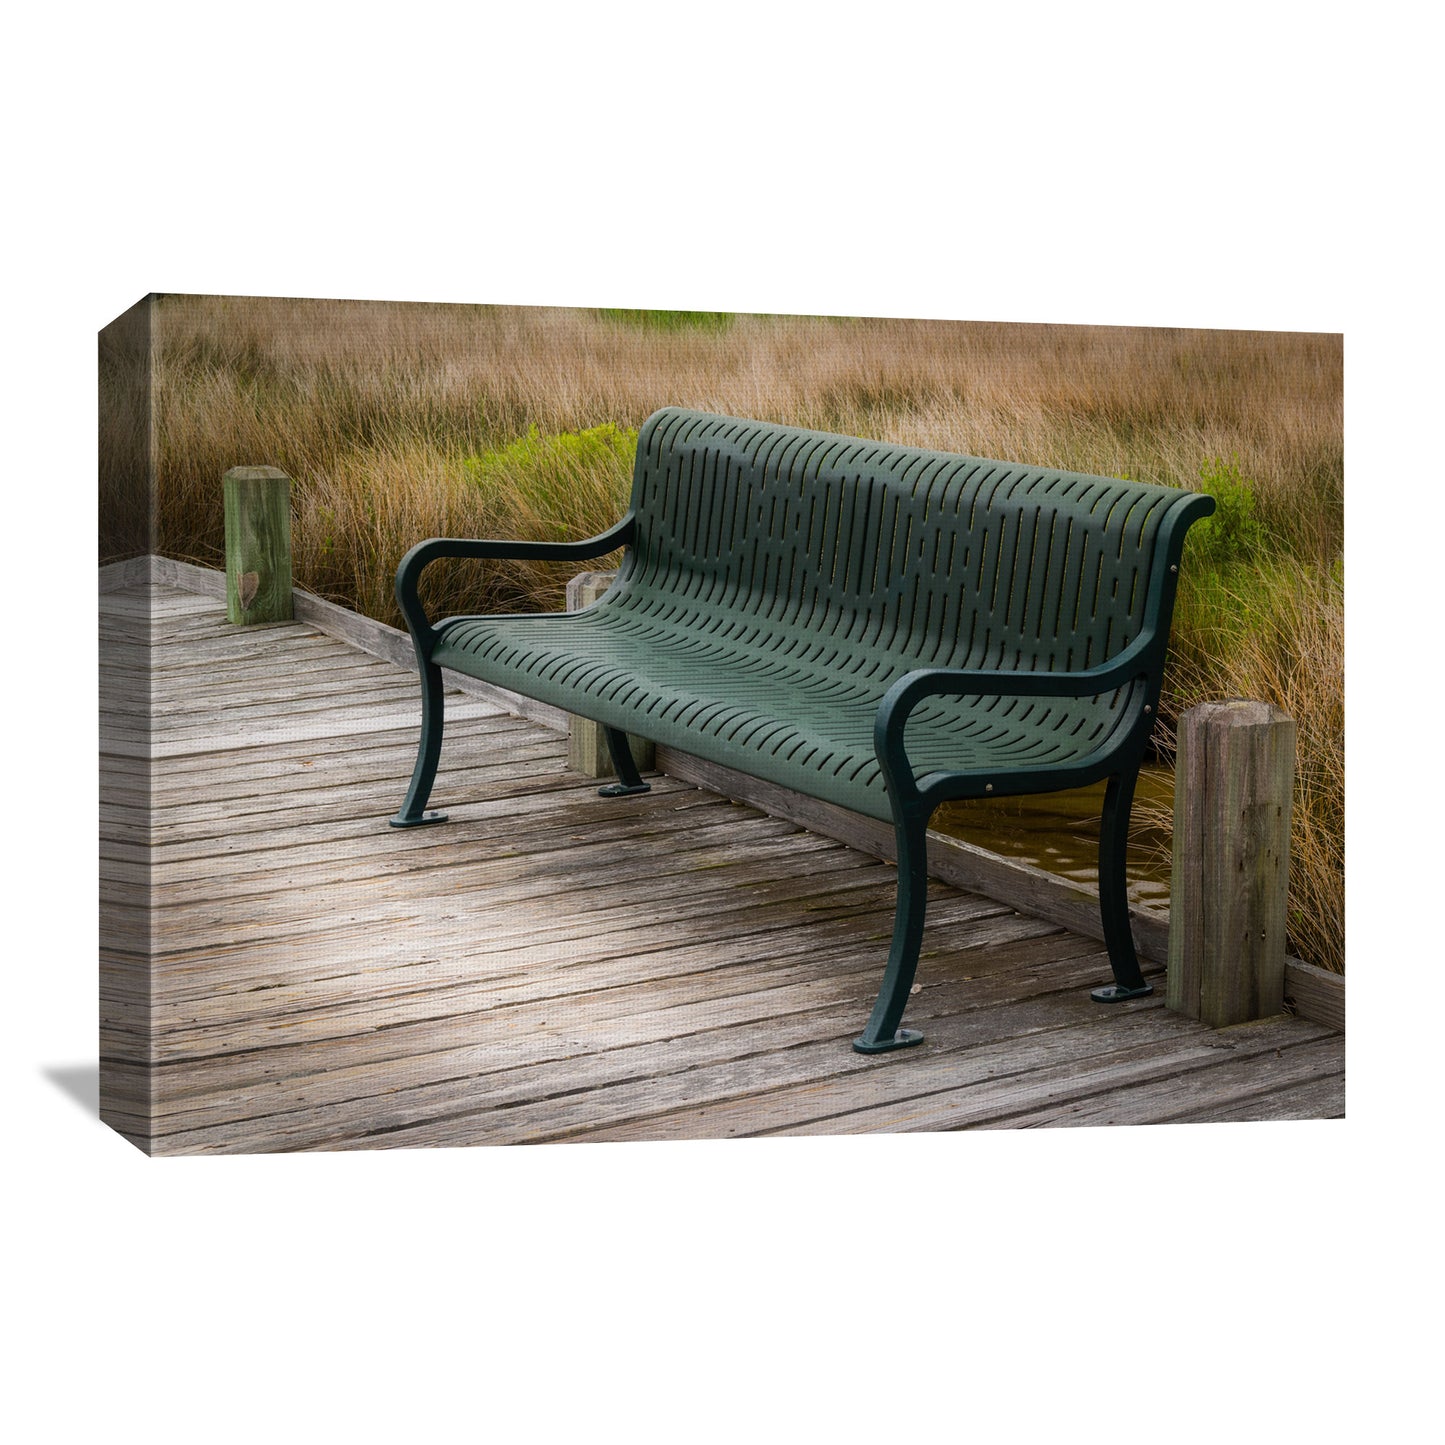 Our canvas artwork focuses on a classic iron bench along the coast, enveloped by the subtle movement of seagrasses in the sea breeze.